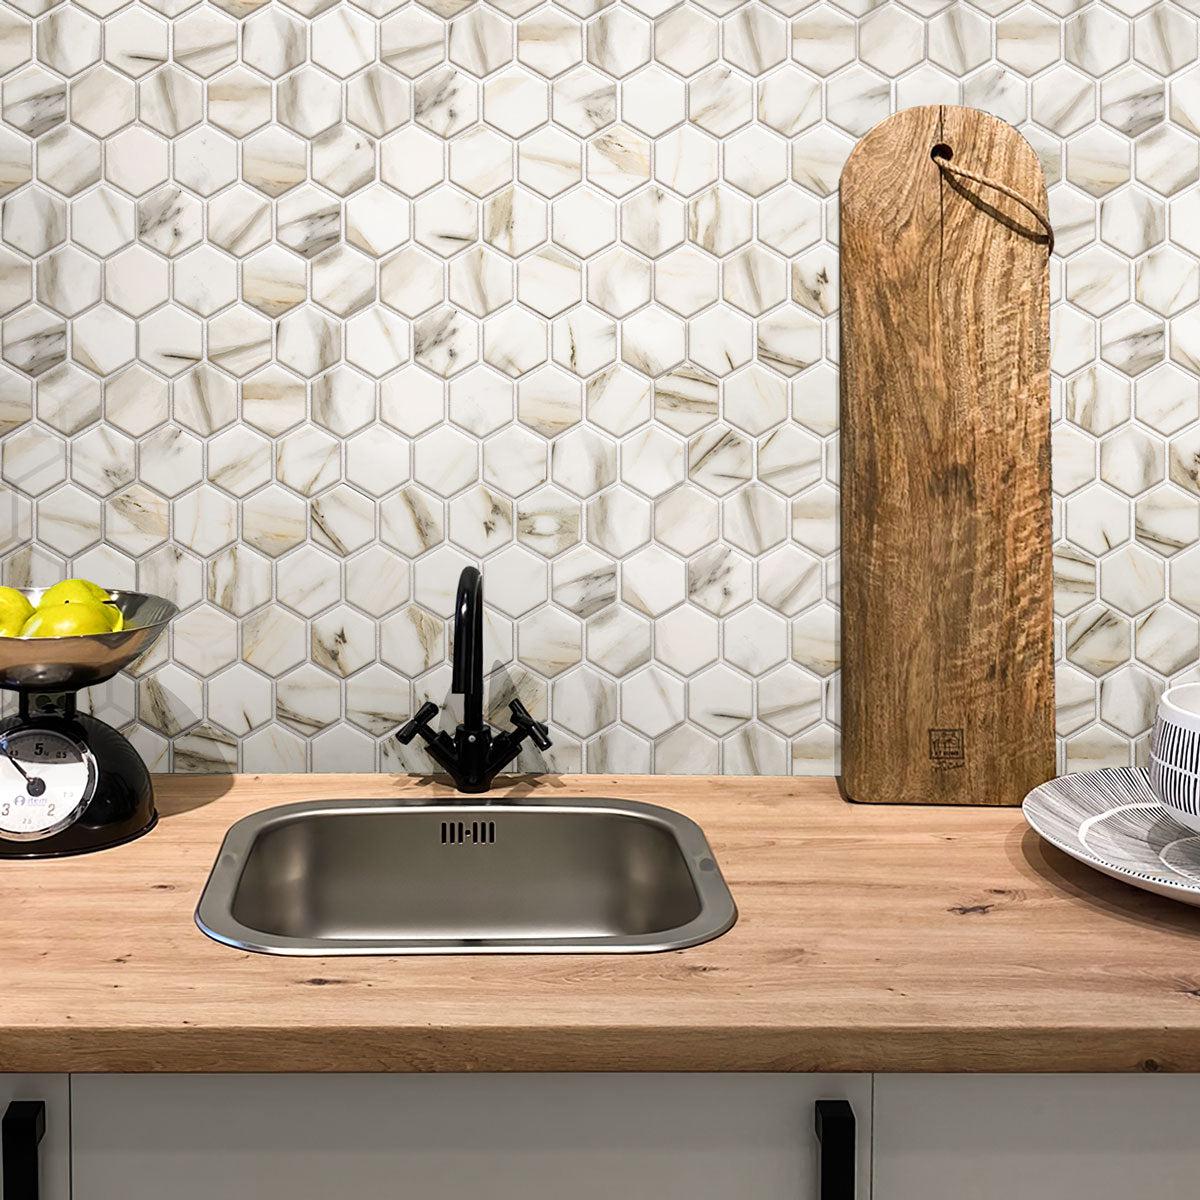 Recycled Glass Hexagon Mosaic In Calacatta Marble Color kitchen backsplash